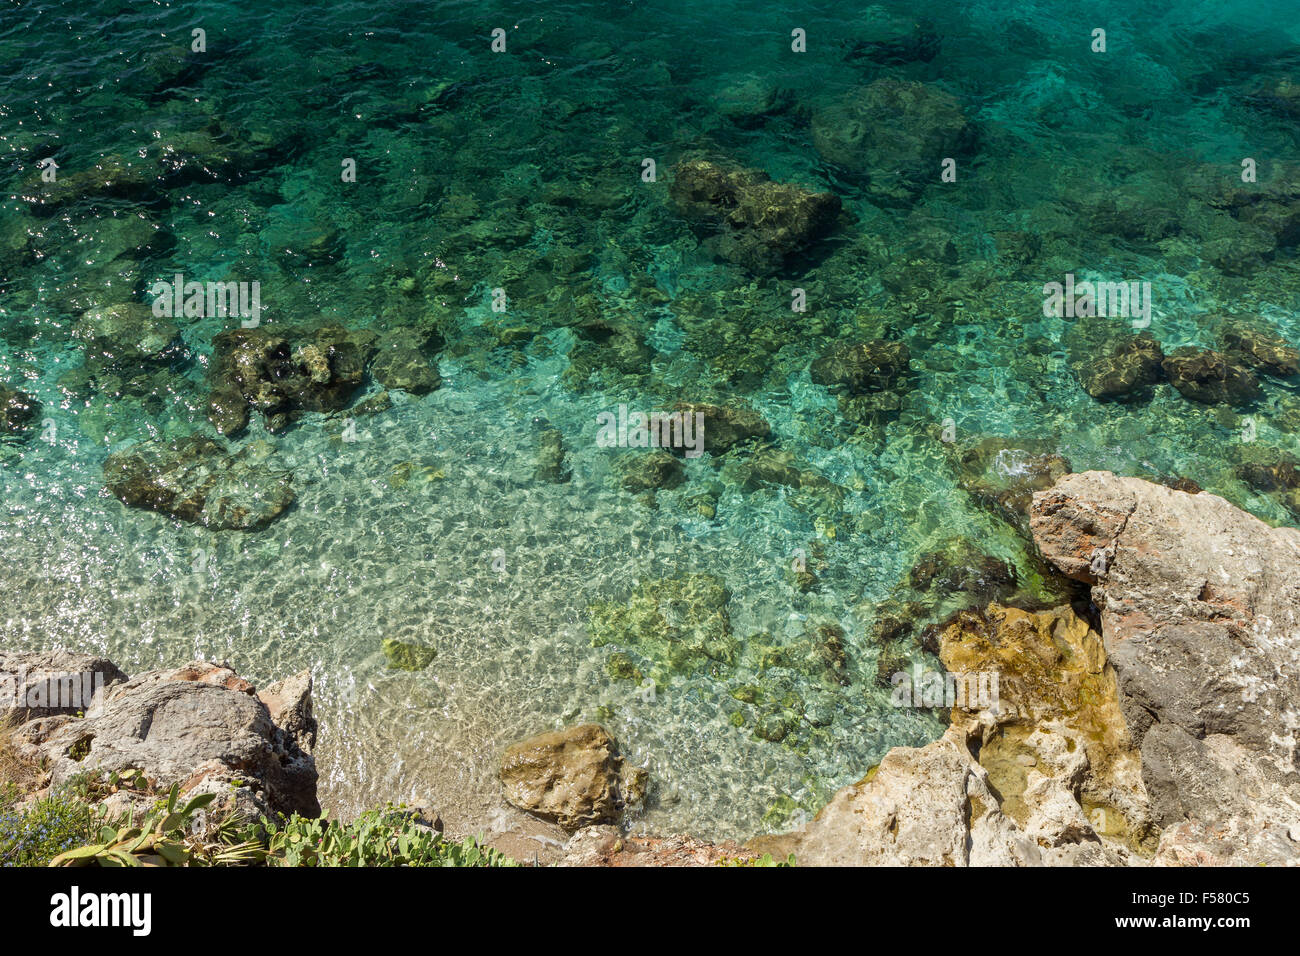 Rocky coastline and shallow water viewed from above in Dubrovnik, Croatia. Stock Photo